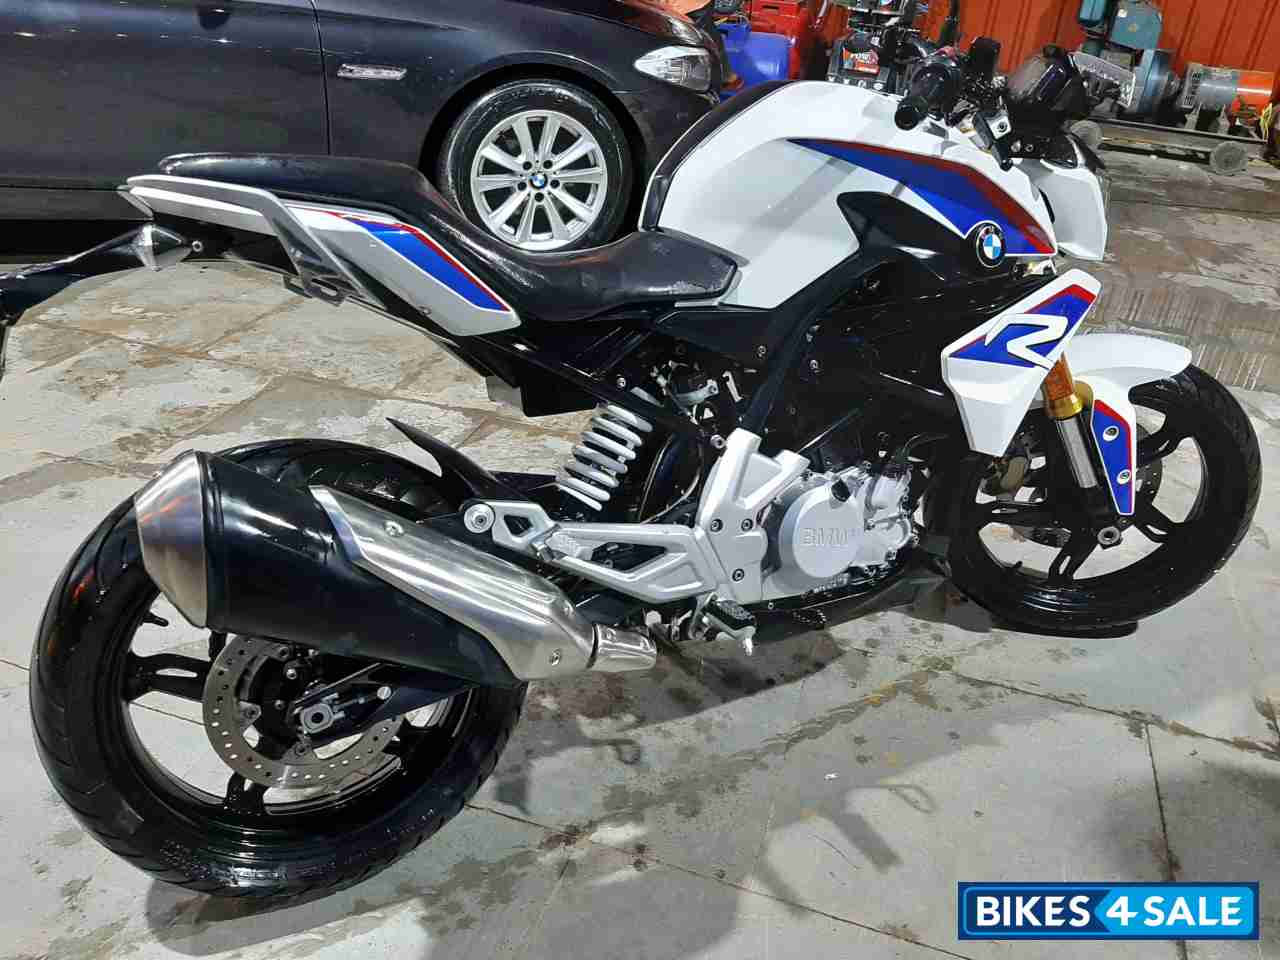 Used 18 Model Bmw G 310 R For Sale In Bangalore Id Pearl White Colour Bikes4sale